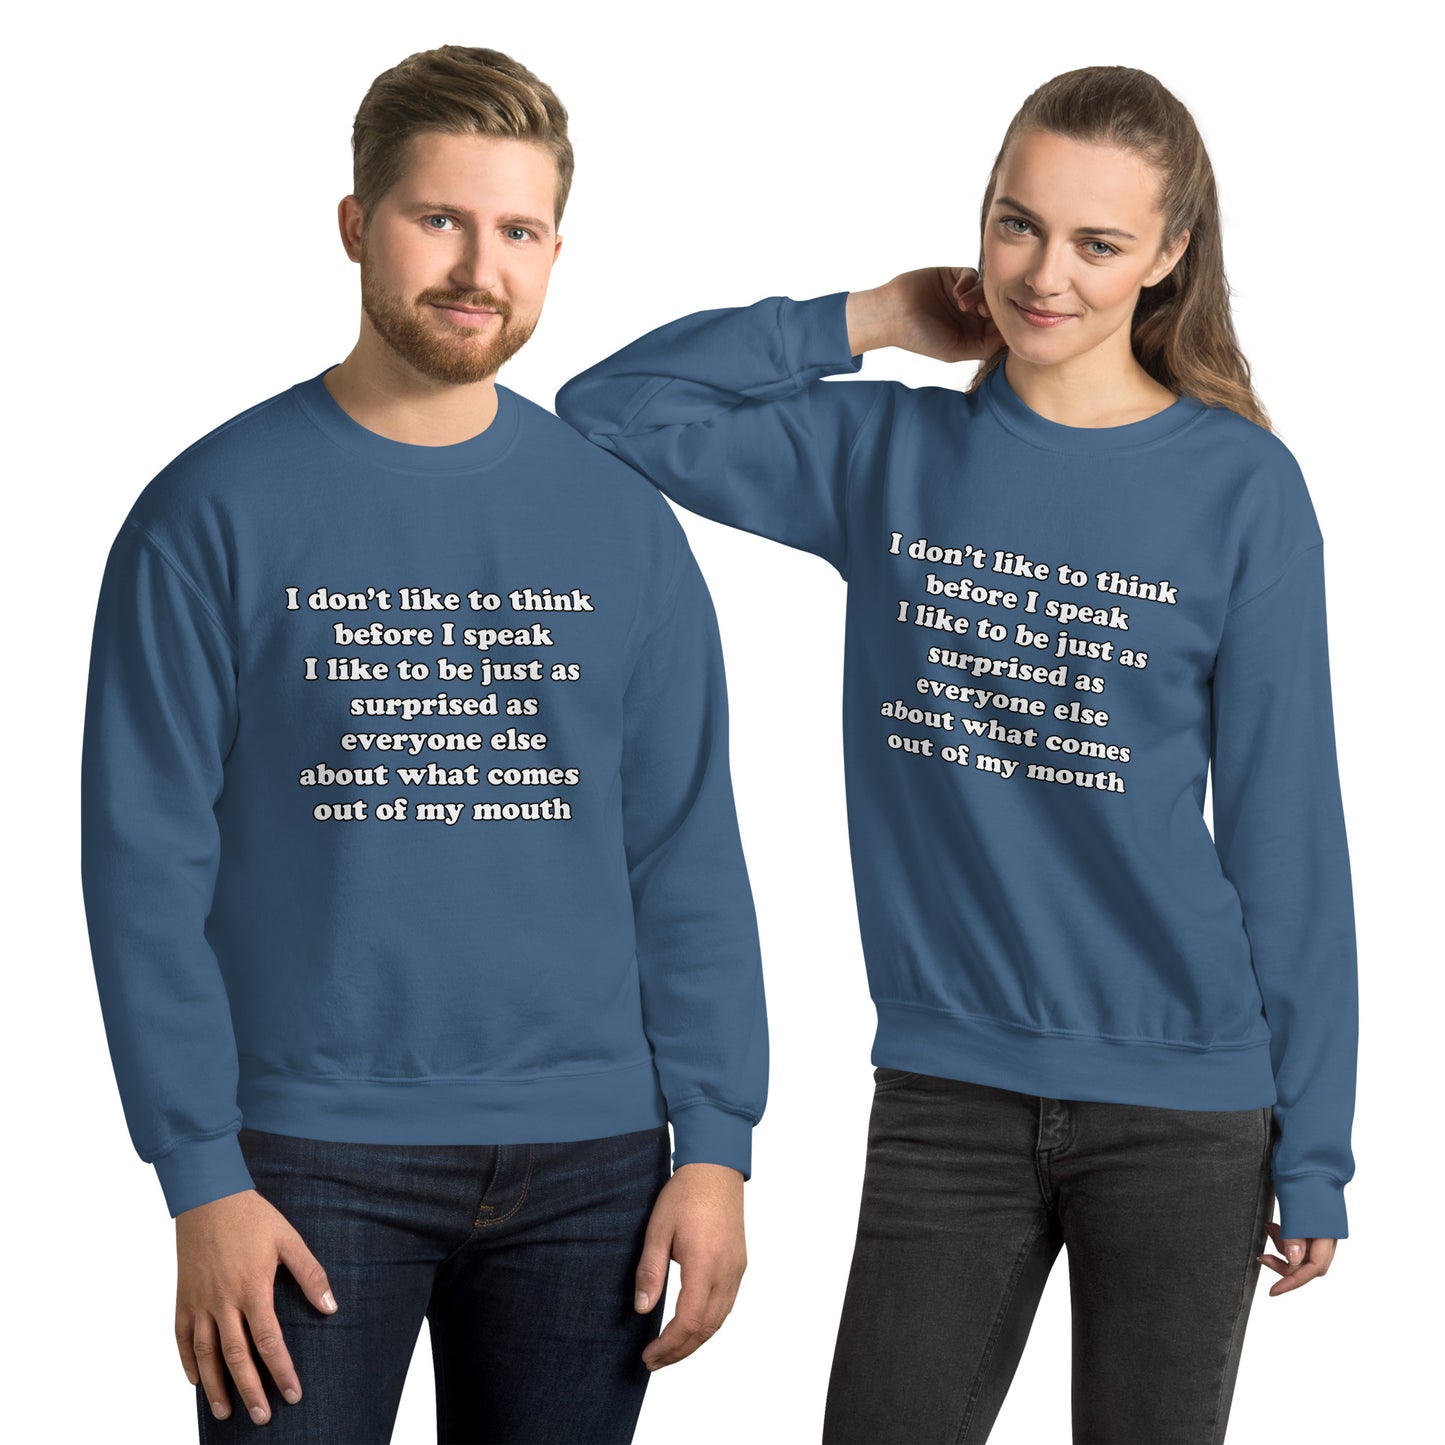 Man and woman with indigo blue sweatshirt with text “I don't think before I speak Just as serprised as everyone about what comes out of my mouth"